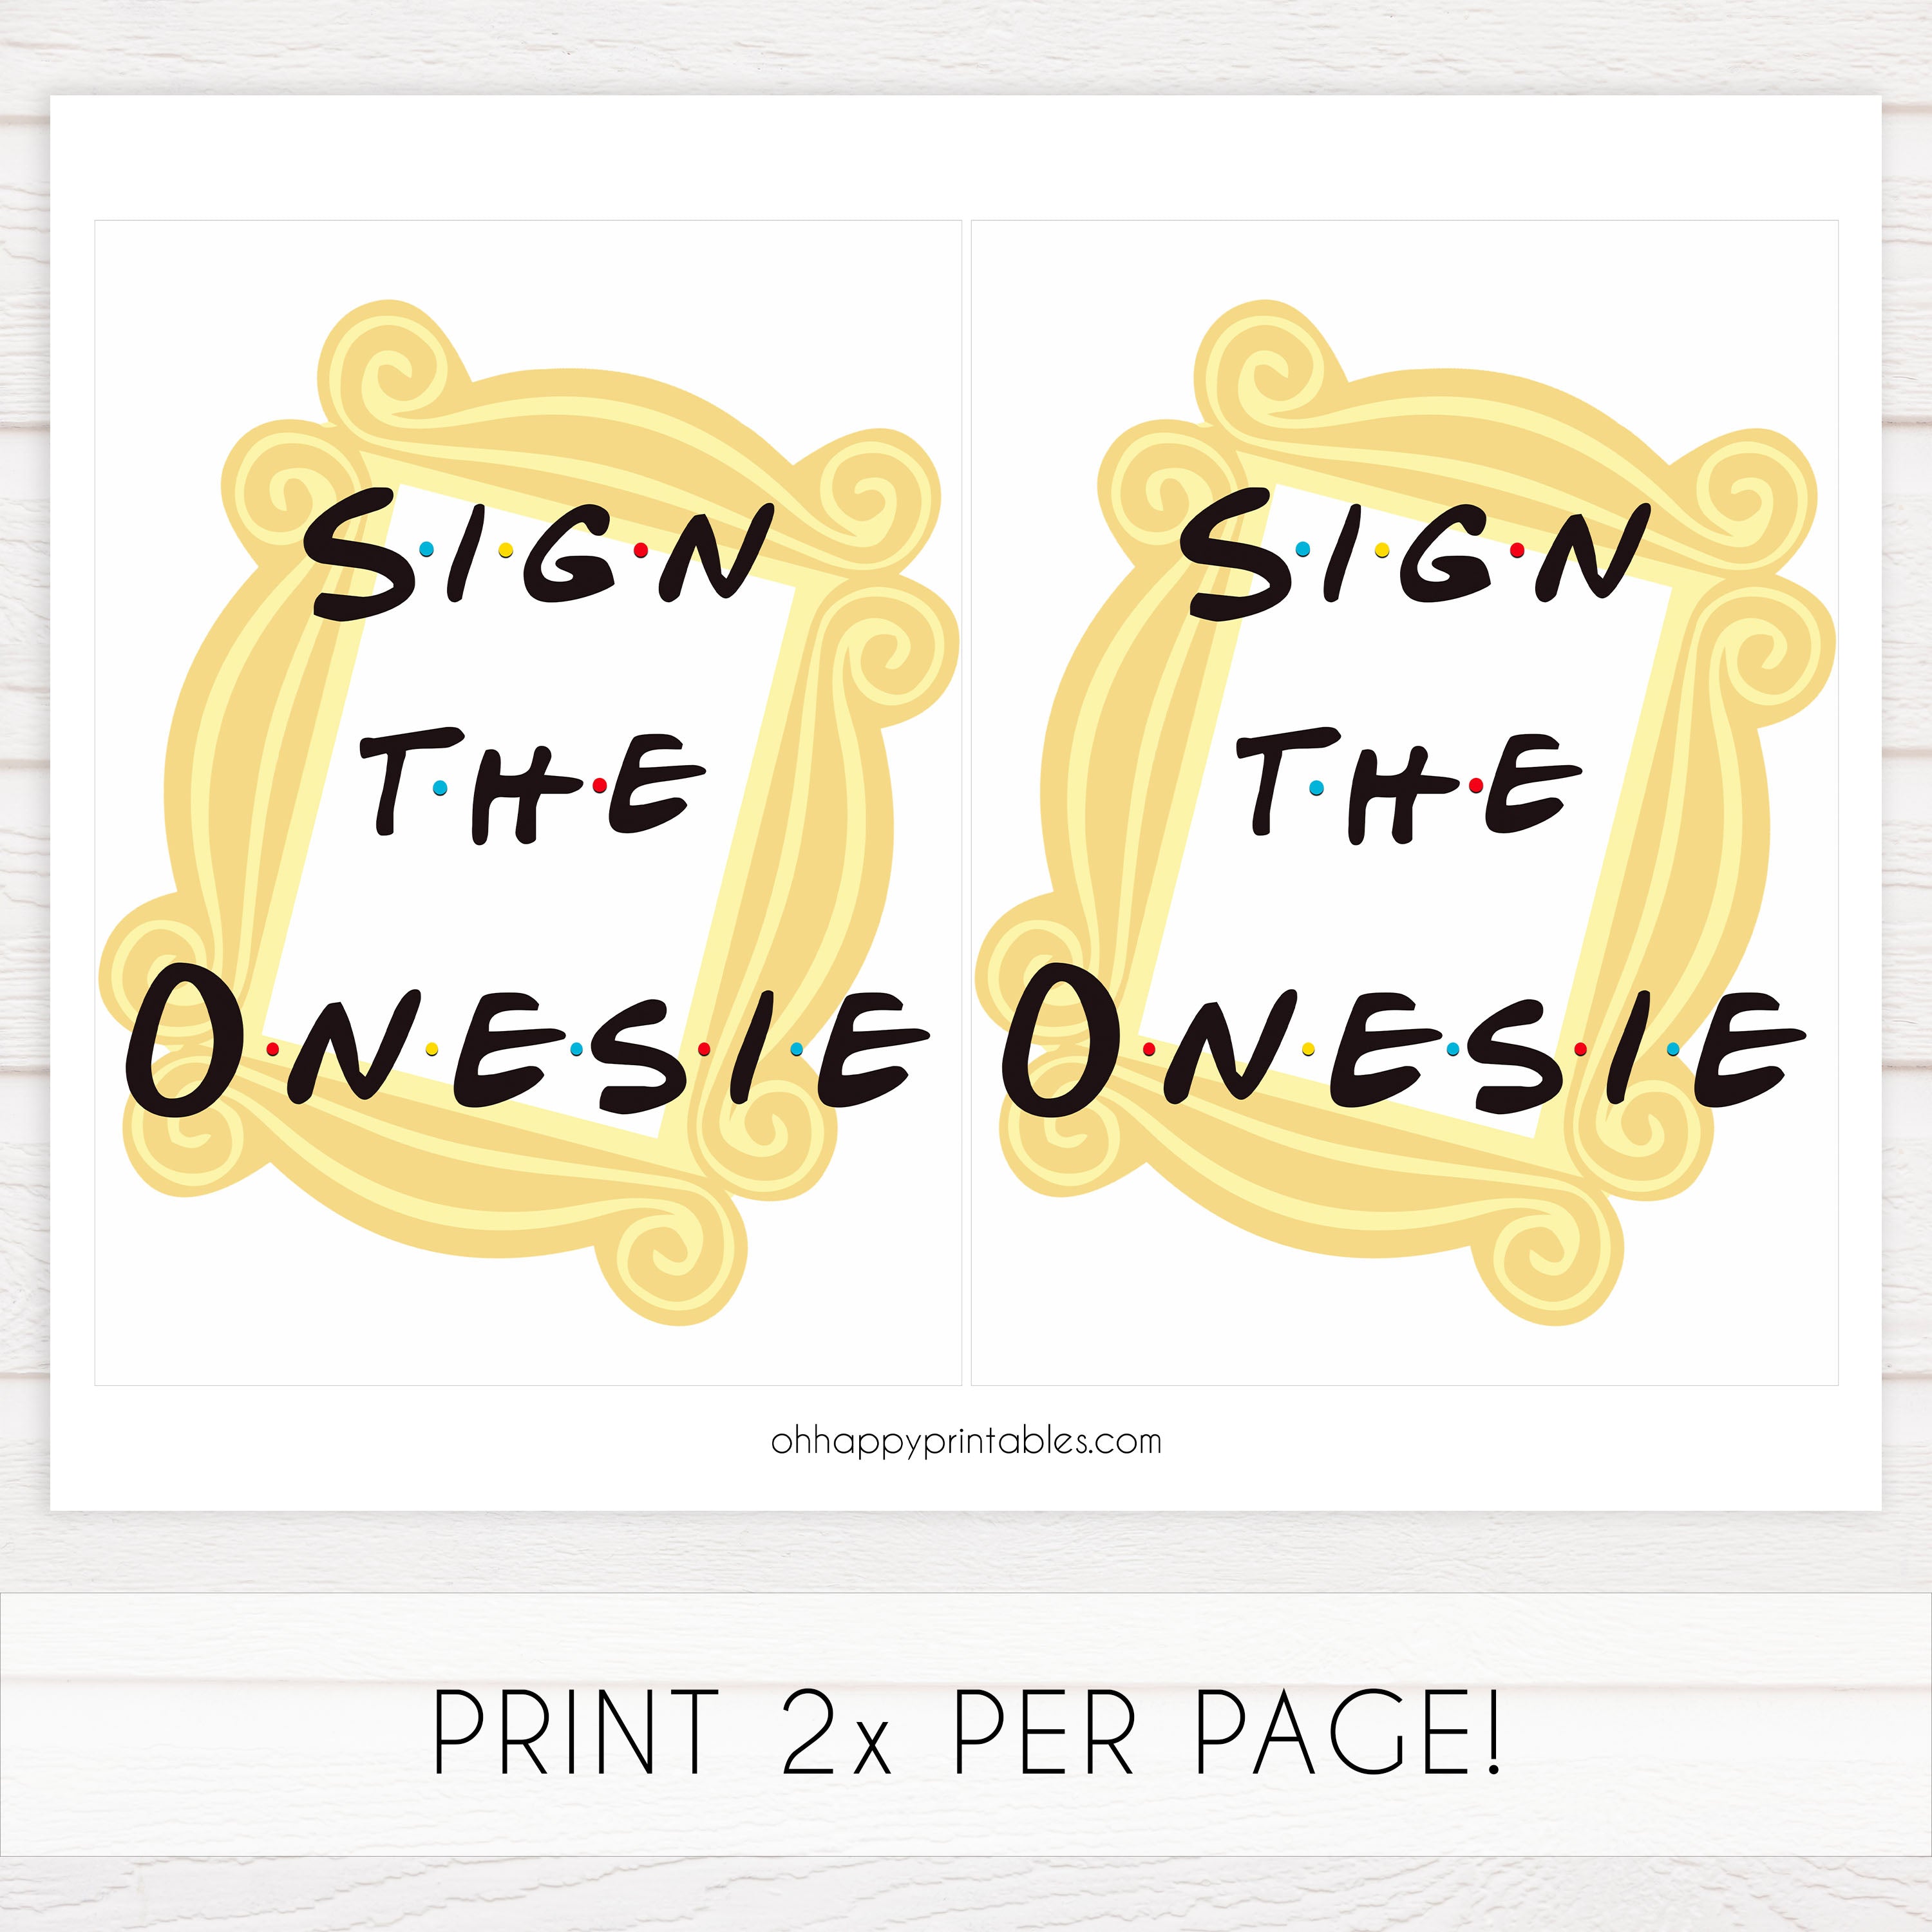 sign the onesie baby sign, Printable baby shower games, friends fun baby games, baby shower games, fun baby shower ideas, top baby shower ideas, friends baby shower, friends baby shower ideas